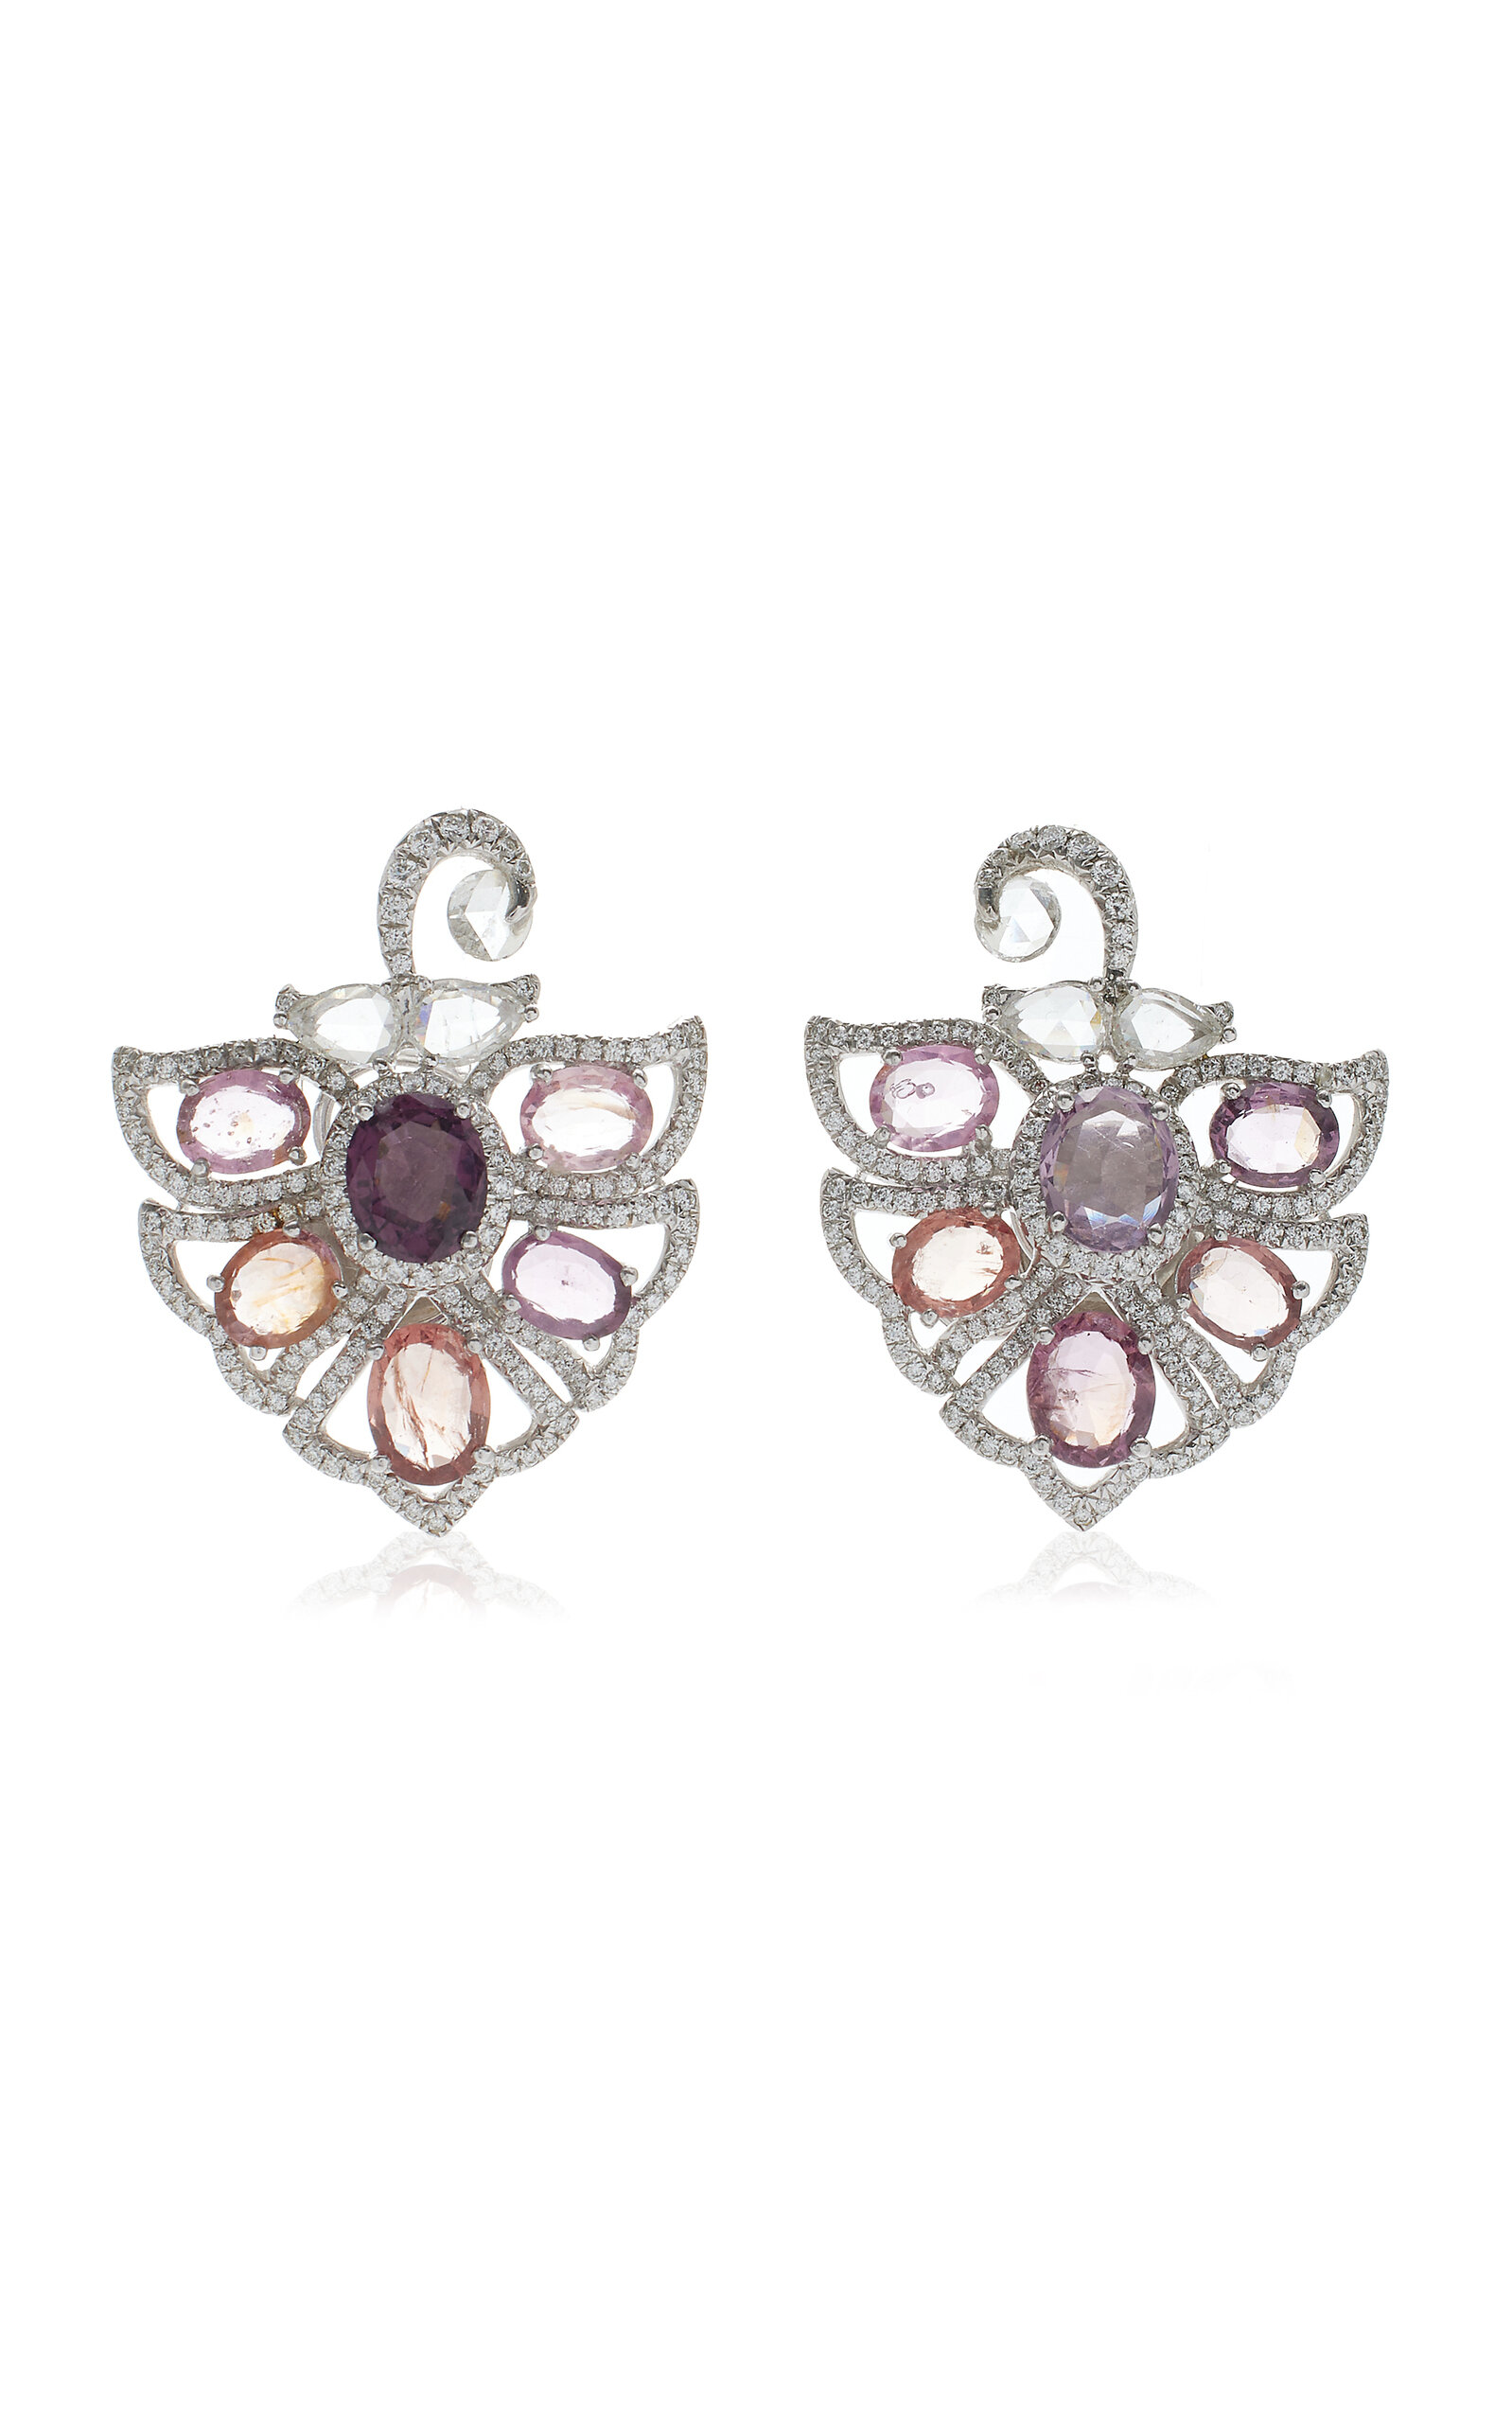 Amrapali One of a kind 18K White Gold Spinel & Diamond Earrings